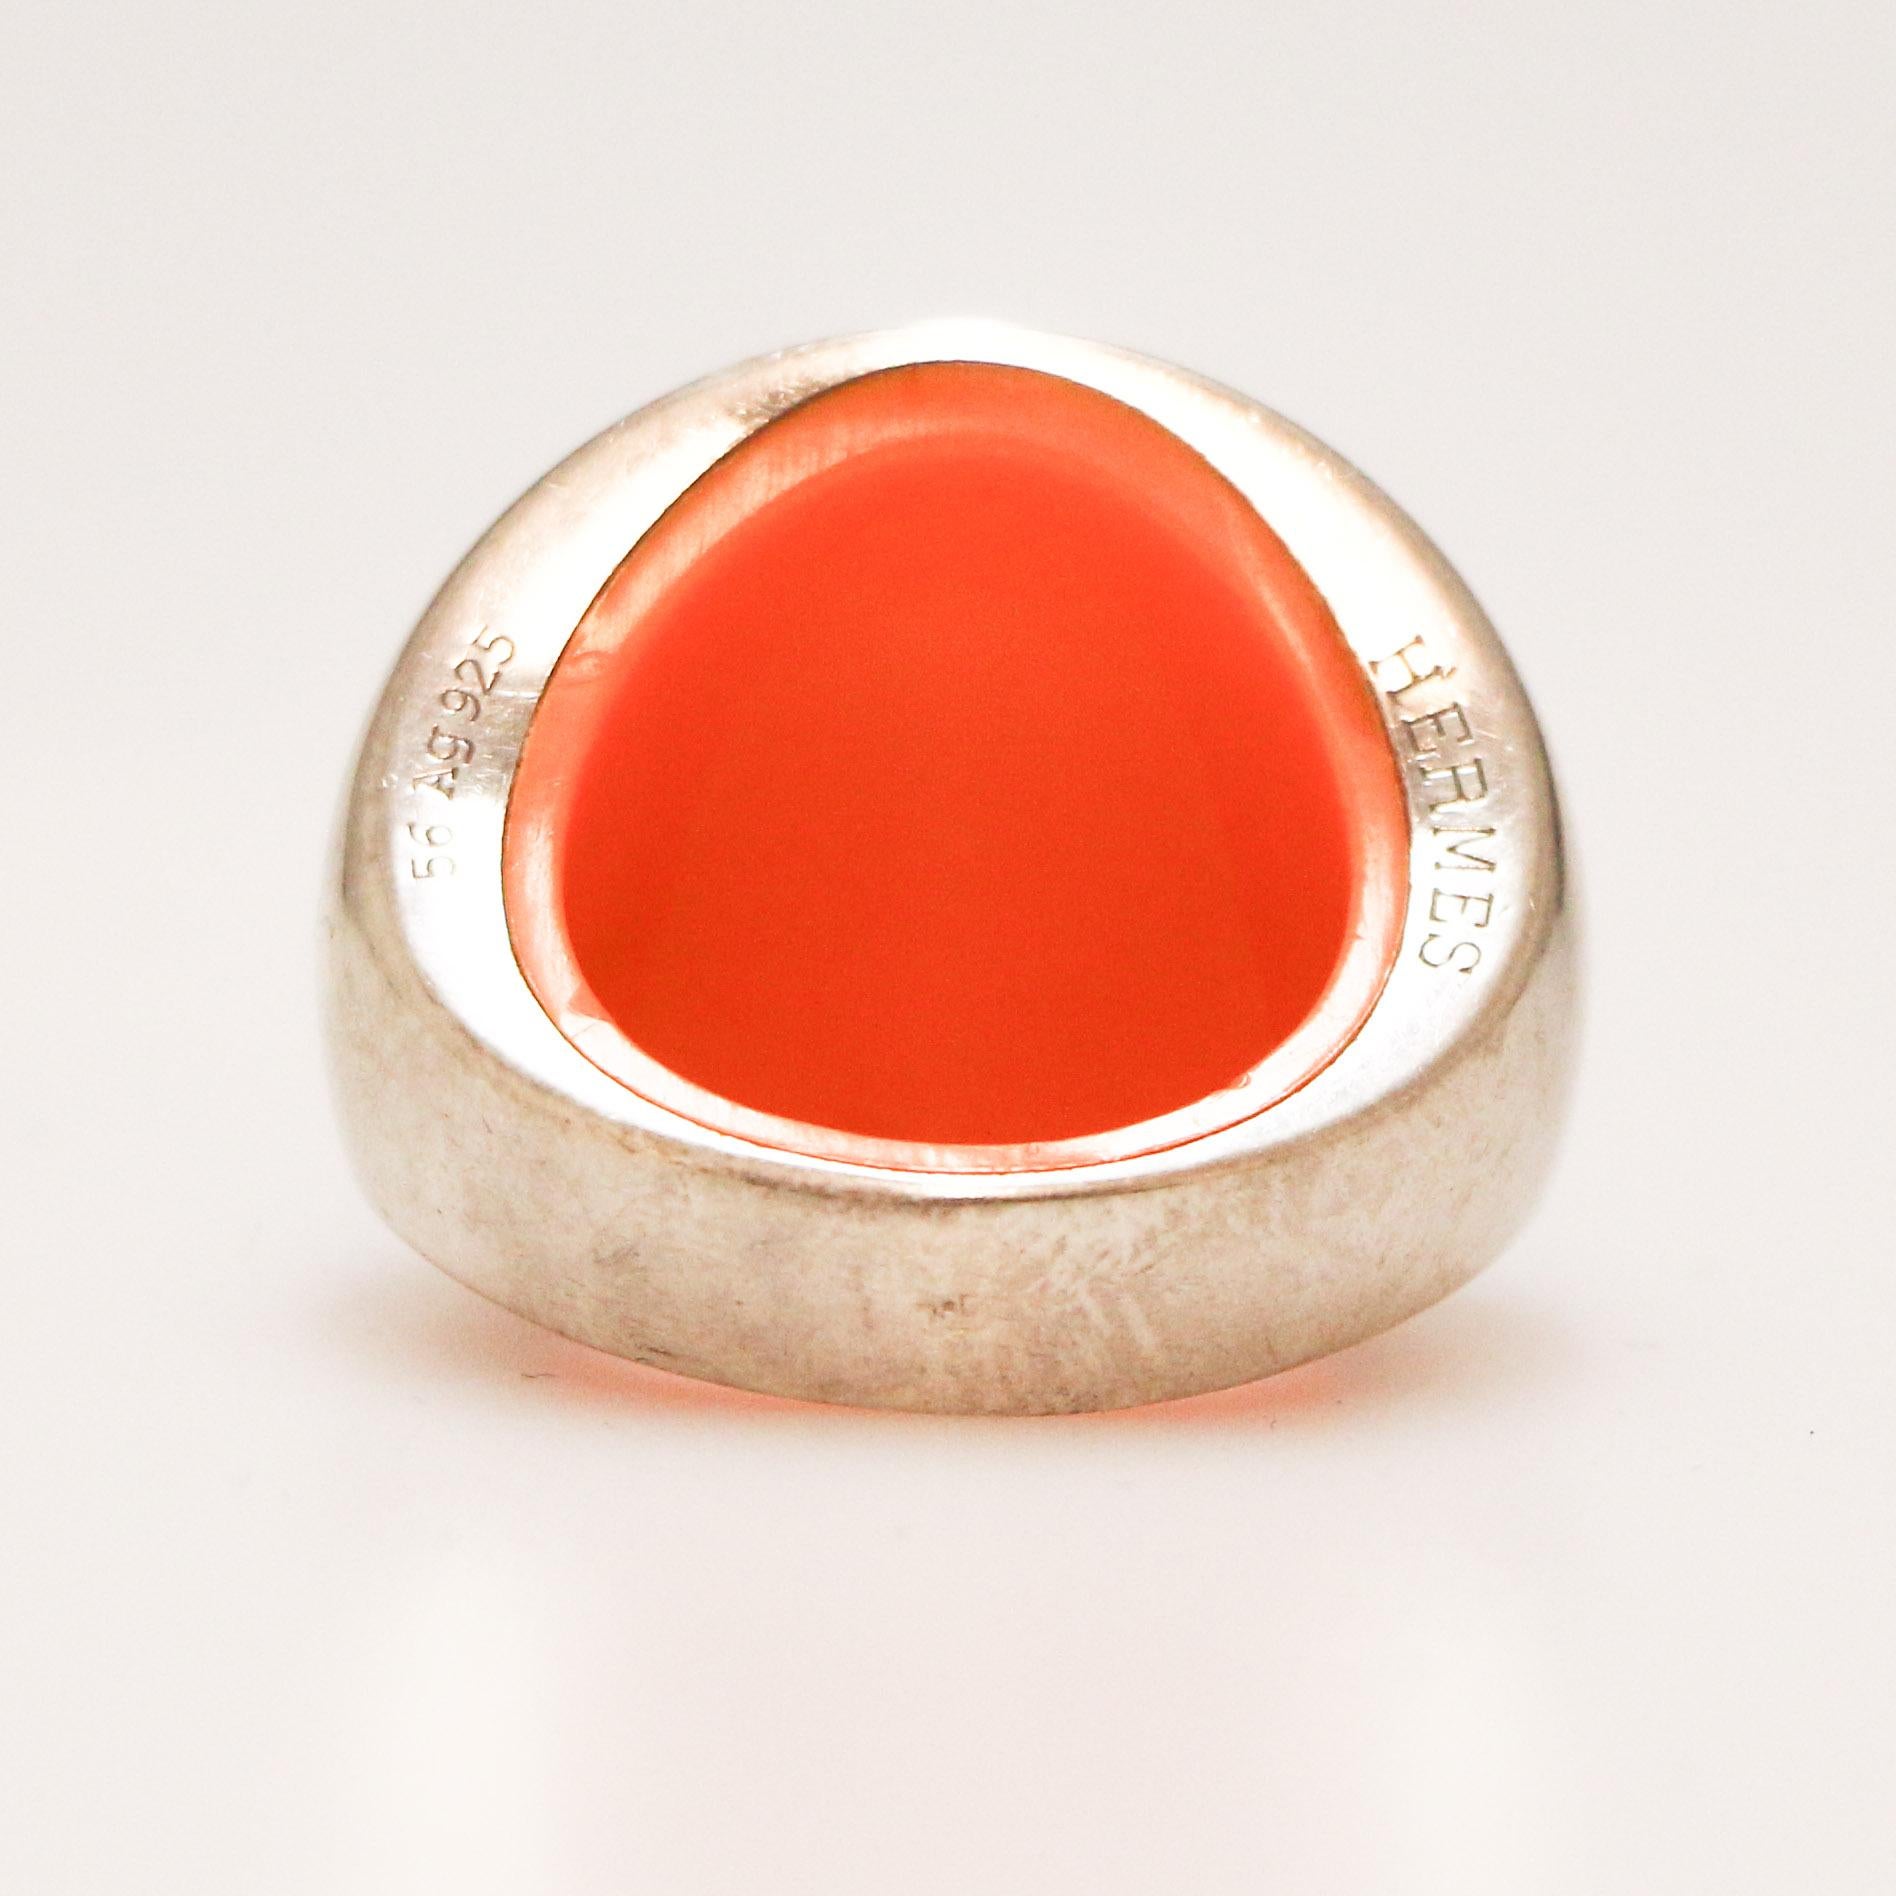 Beautiful Hermès ring in silver 925

Condition: excellent (micro-scratches on the silverware)
Made in France
Size: 56
Material: silver 925
Color: silver, orange
Dimensions: 3cm
Stamp: yes